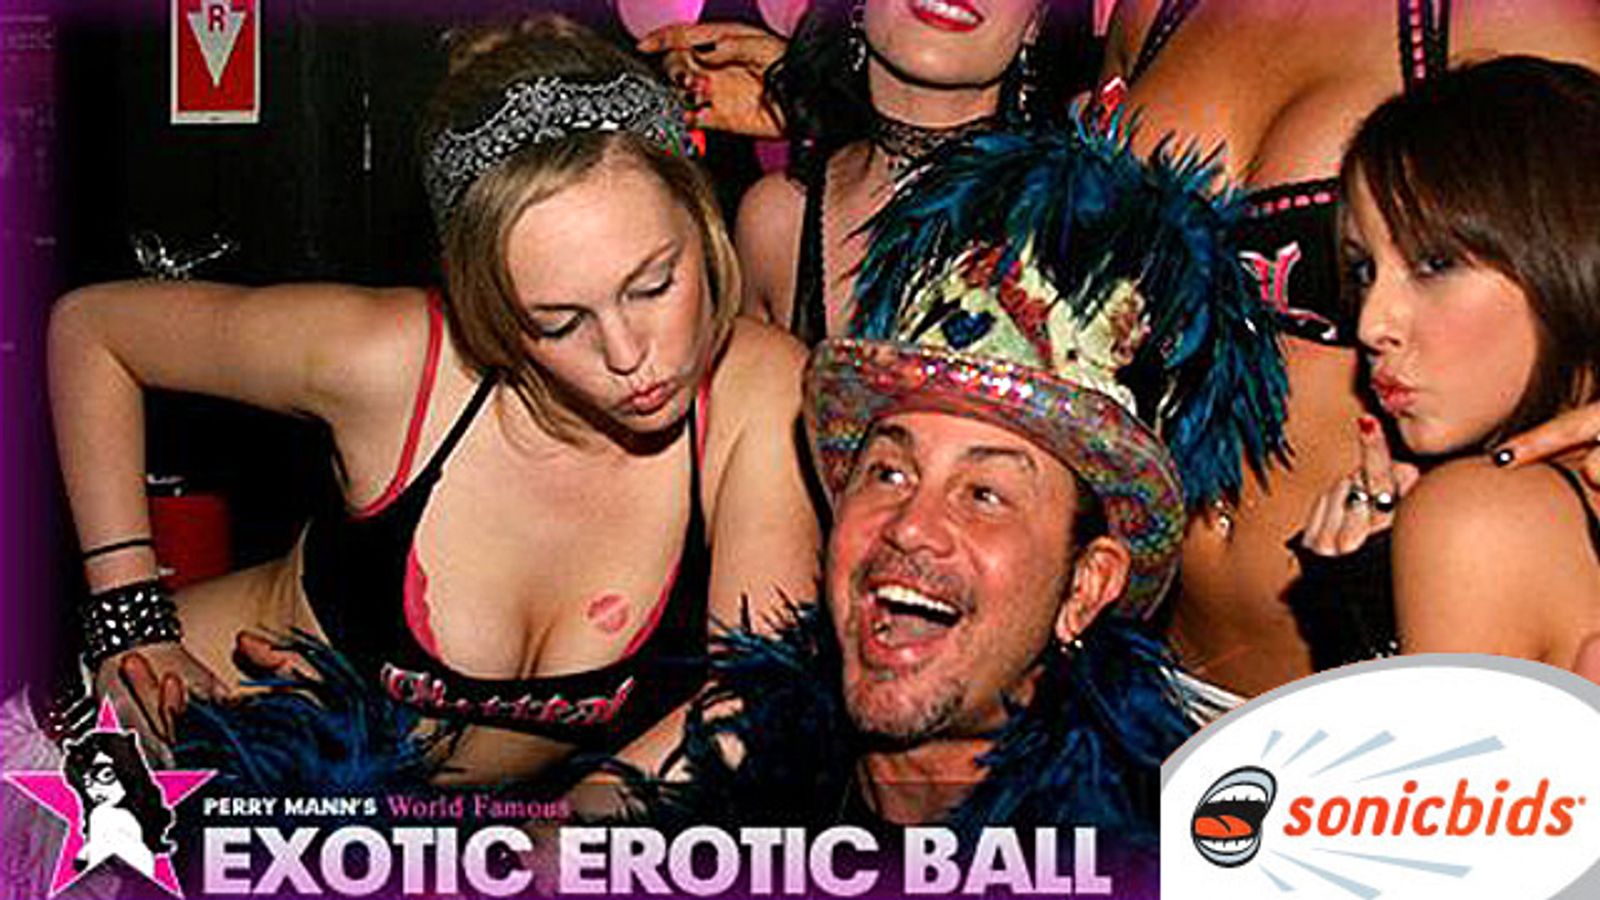 Exotic Erotic Ball, Sonicbids Team Up to Offer Prime Gigs to Indie Bands